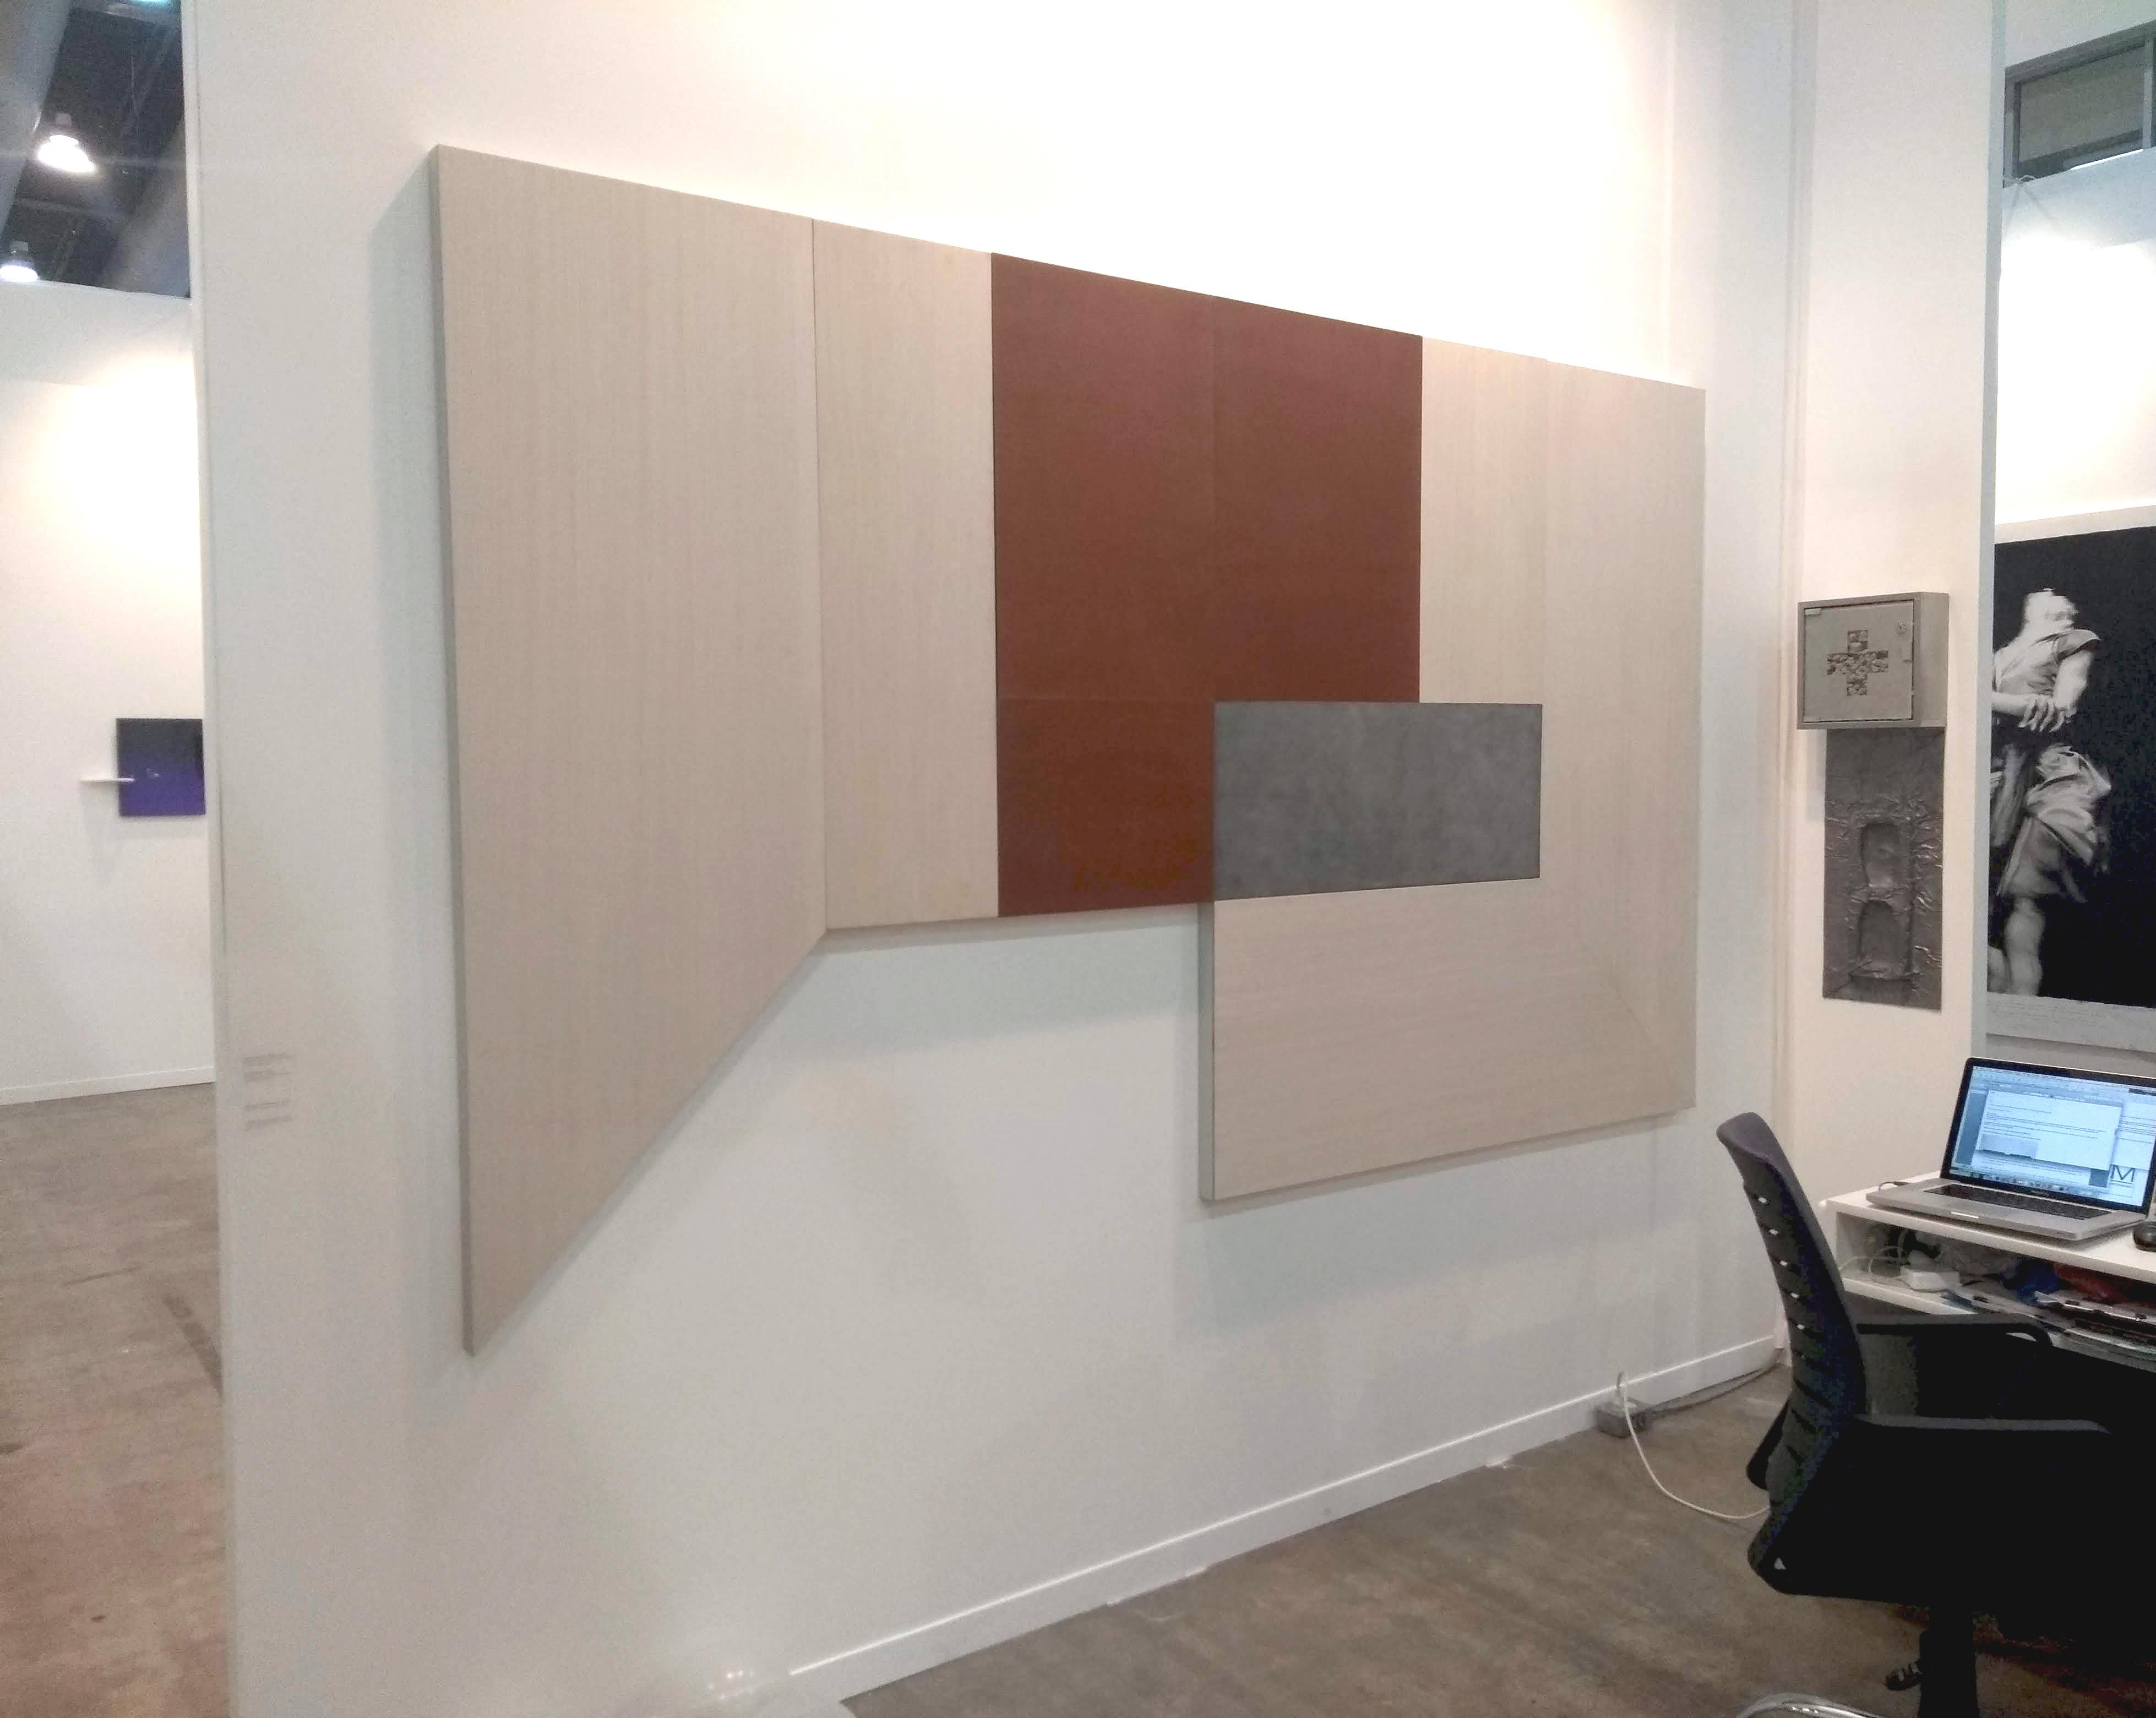 Egyptian wood laminate, steel and lead on wood mounted on an aluminum base. 
Exhibited at the International Art Fair, Zona Maco 2019 in Mexico City.
